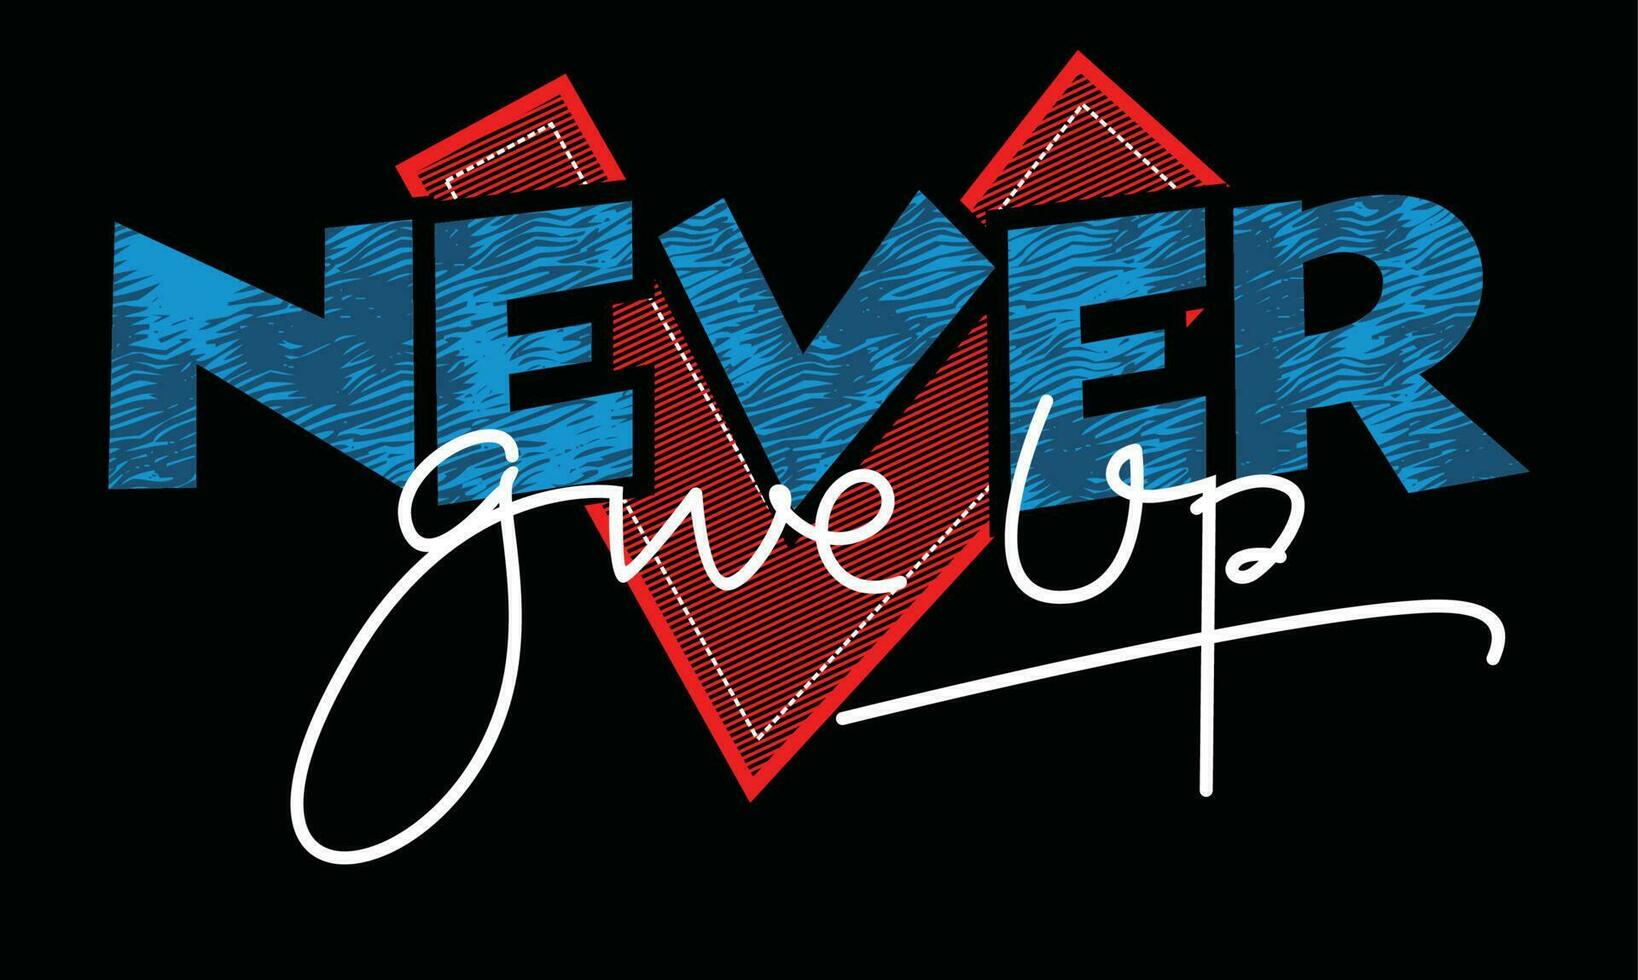 Never give up inspiration and motivational quote and modern lettering typography design.tshirt,clothing,apparel and other uses in vector illustration.